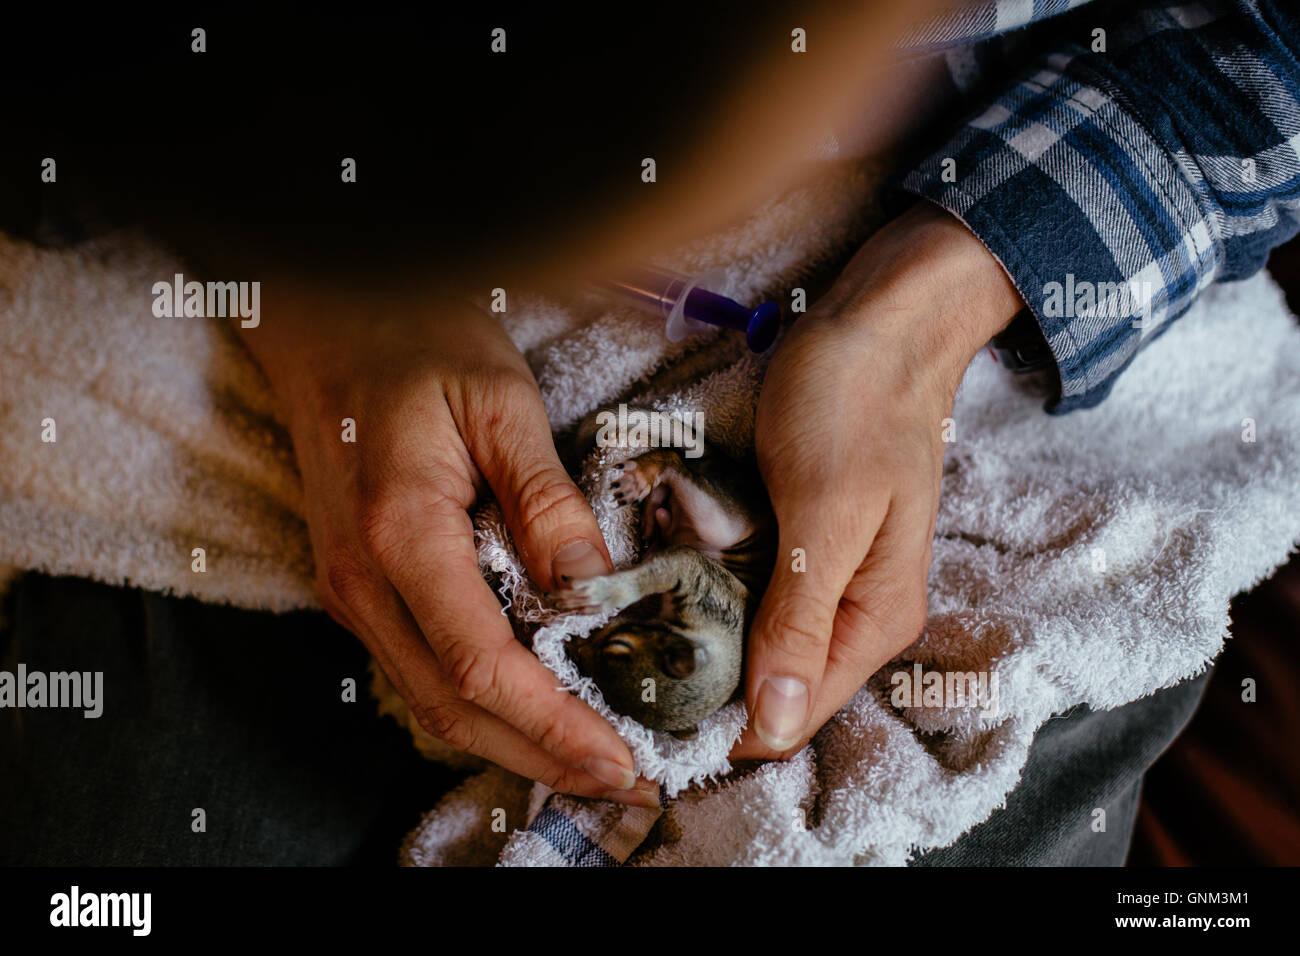 Man cleaning three week old baby squirrel Stock Photo